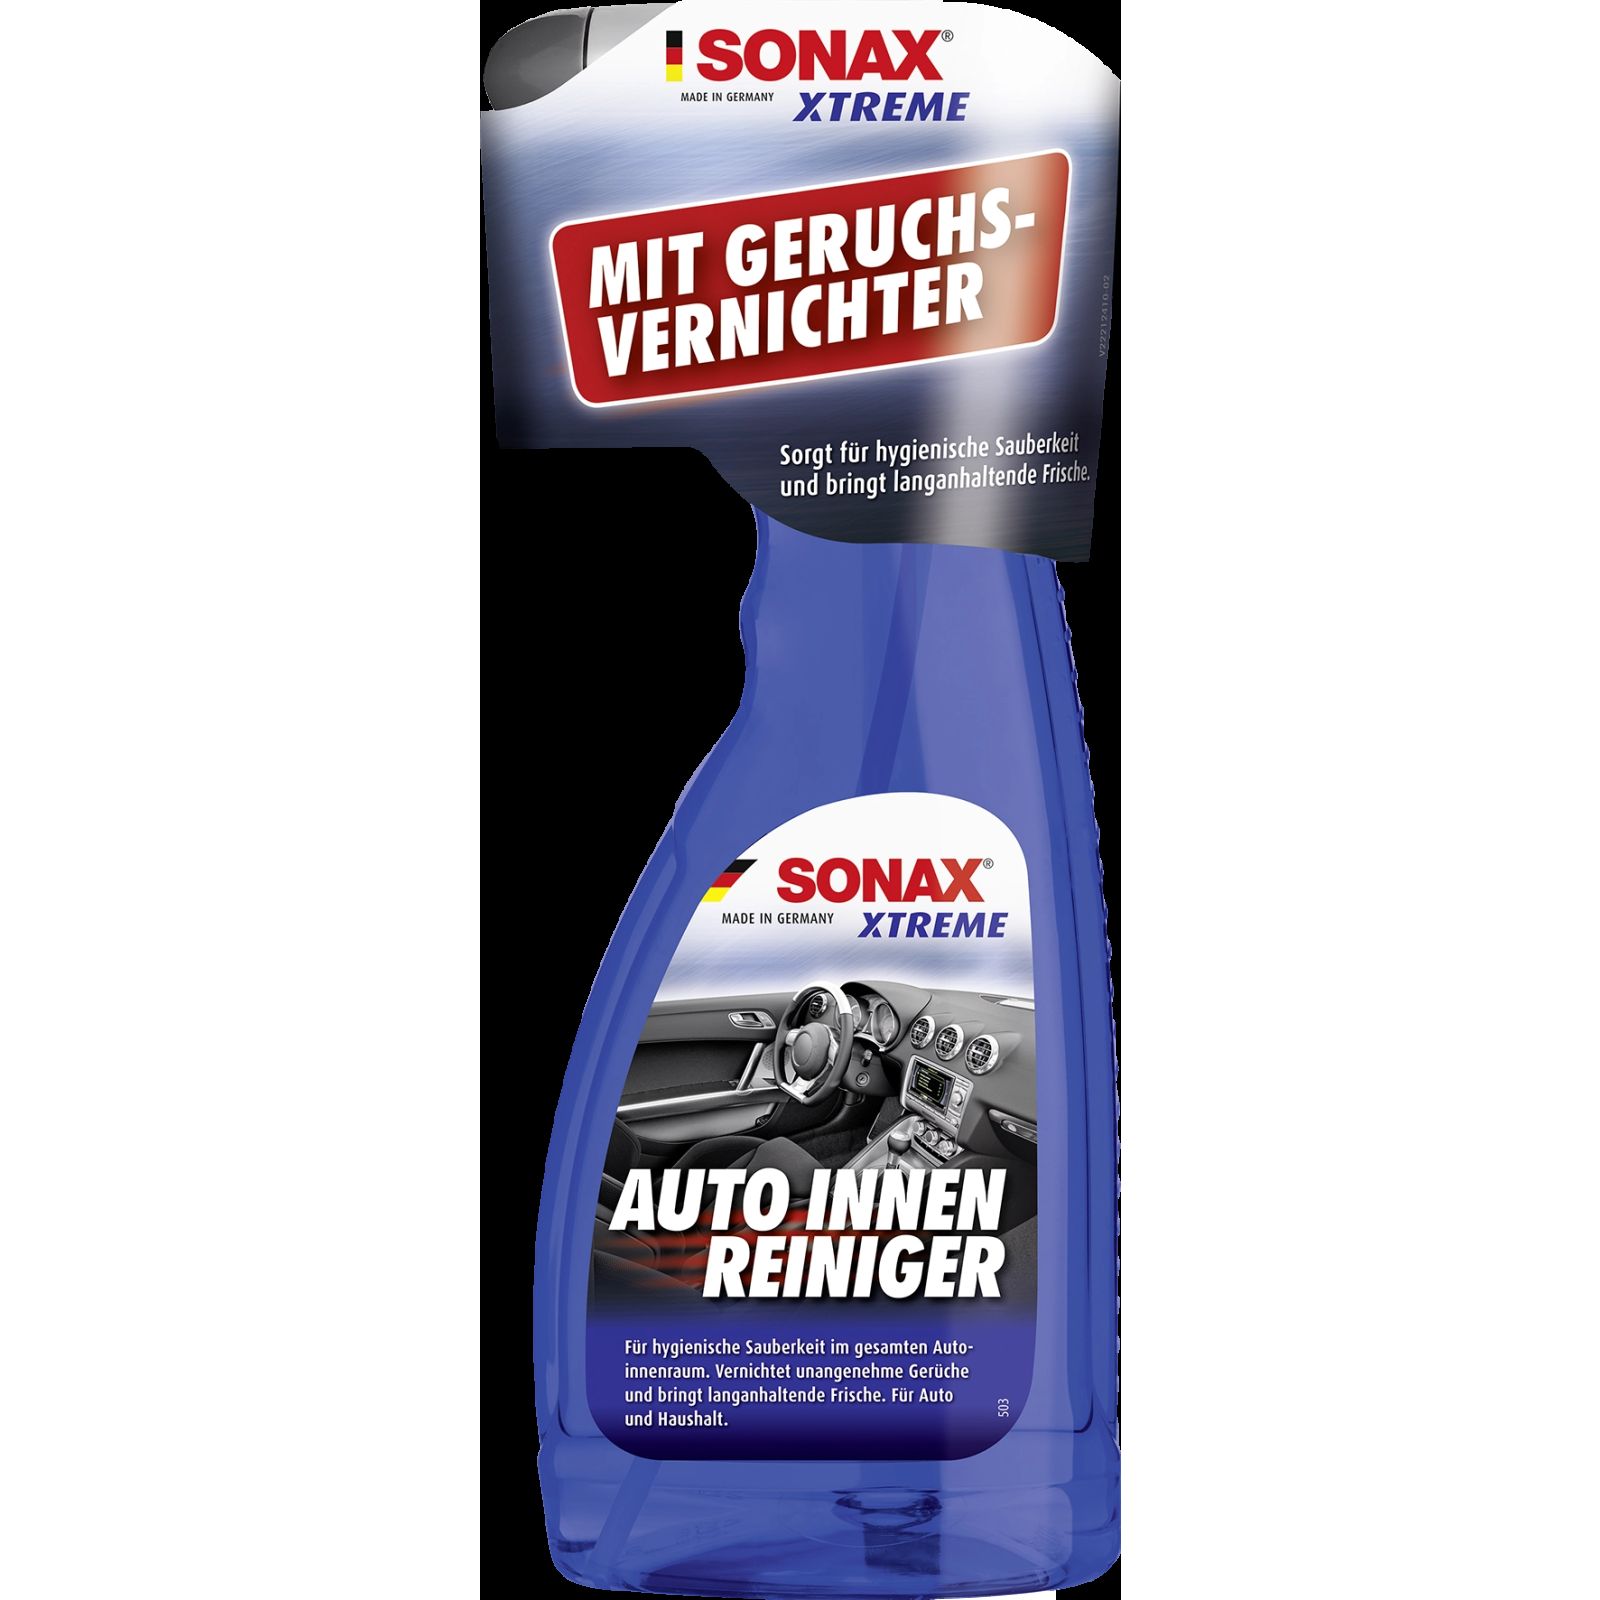 https://www.autoteile-store.at/img/product/sonax-xtreme-autoinnenreiniger-500ml-02212410-4568/a709a567f6d78e47a6f3a8897d96016d_1600.jpg